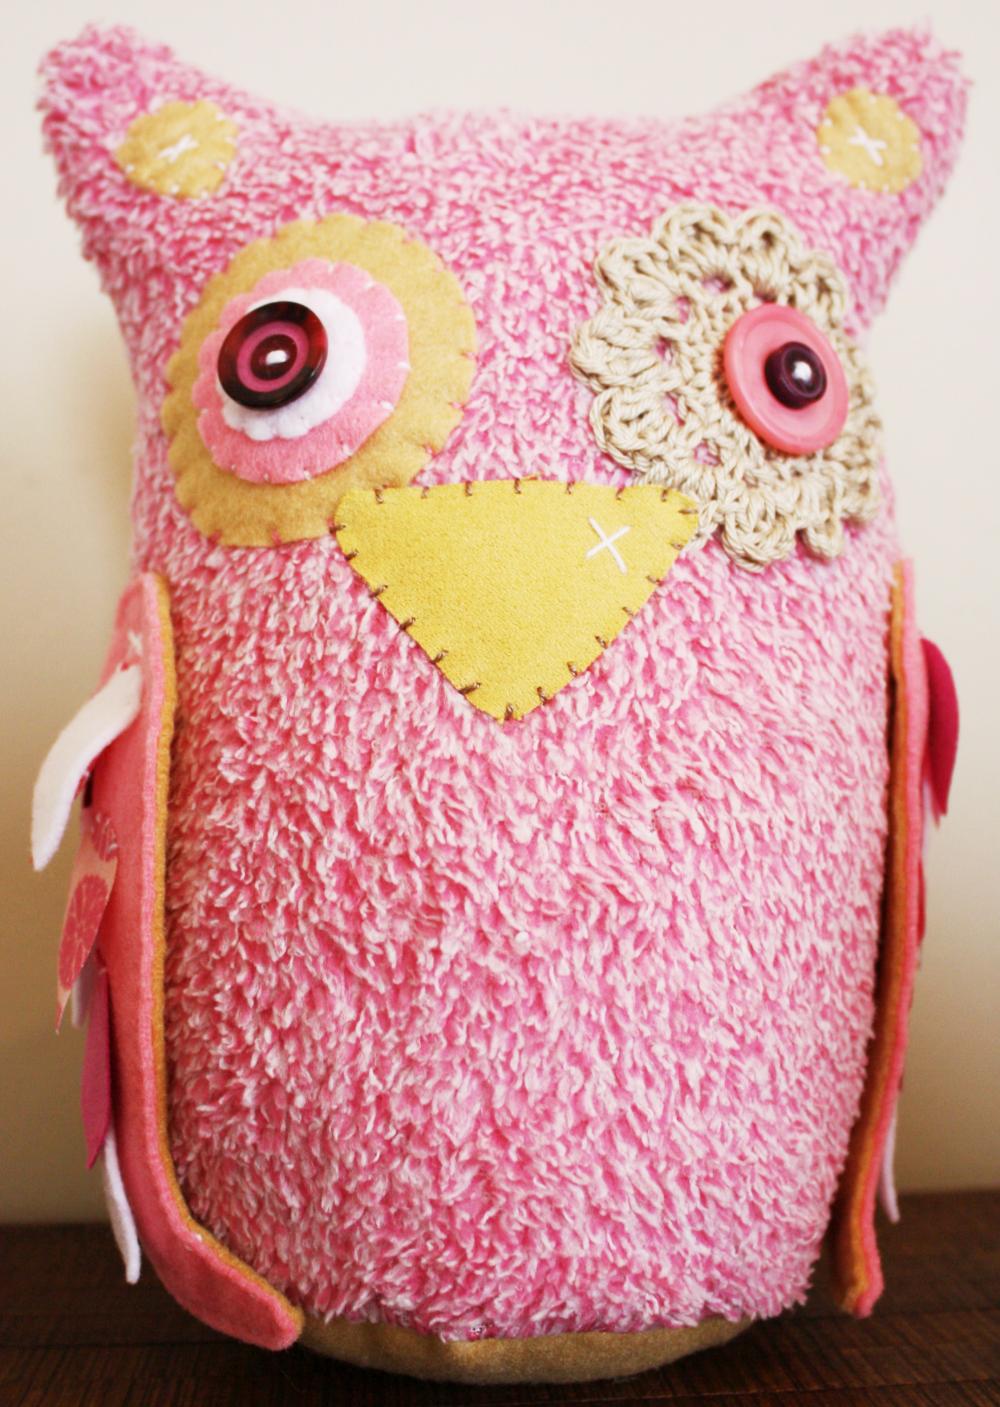 Boobeloobie Large Orli The Owl In Pink, Cream And White Accents With Crochet Eye Detail